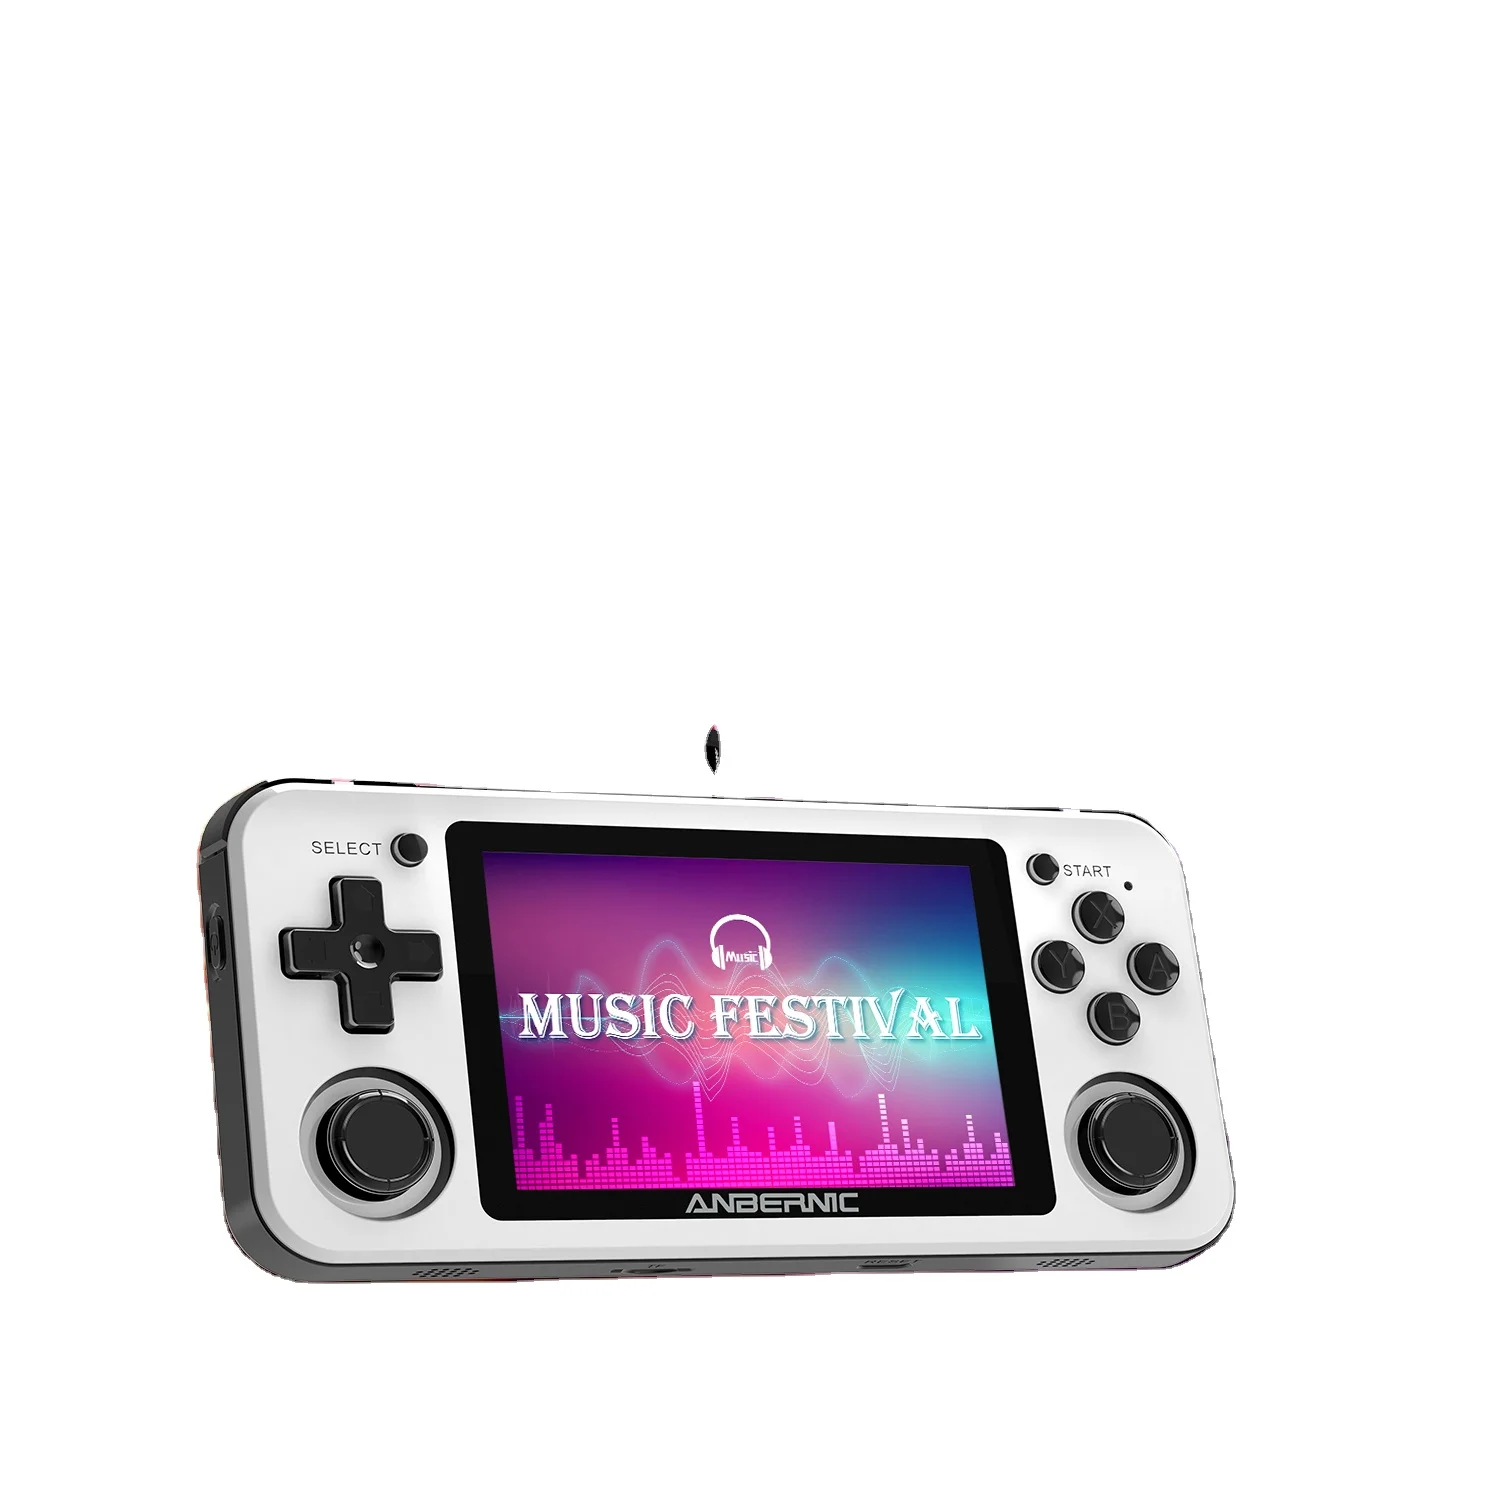 

64G Portable Handheld Game Consoles Gaming Players Box ANBERNIC RG351P Retro Game Console PS1 N64 Video Wifi Game Player